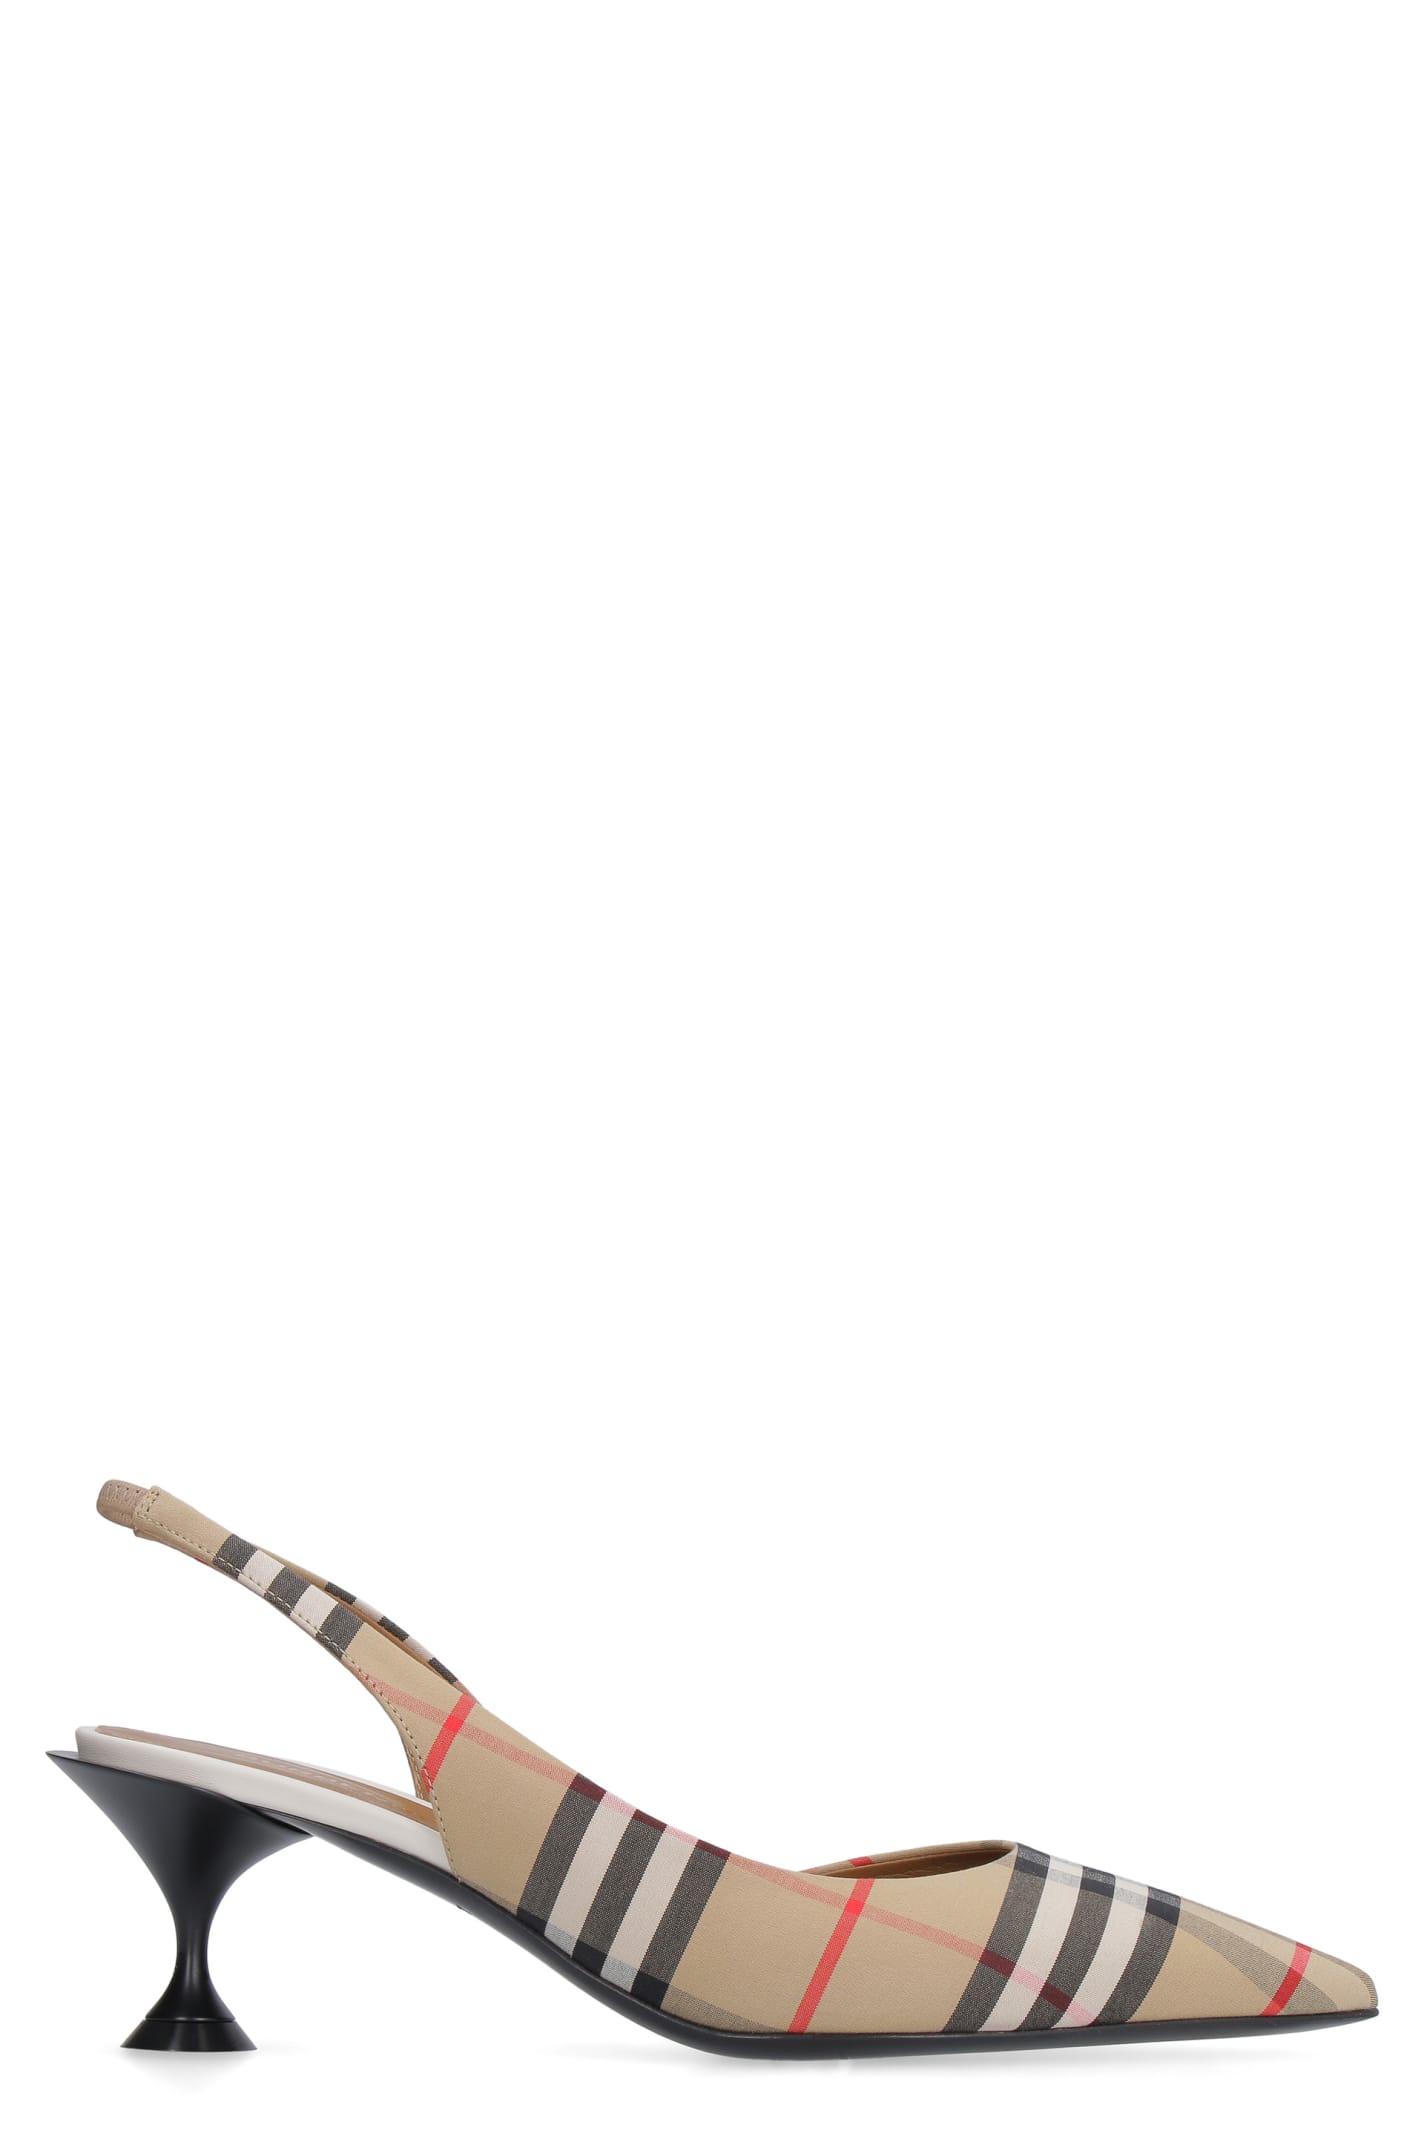 Photo of  Burberry Vintage Check Motif Pointy-toe Slingback- shop Burberry  online sales